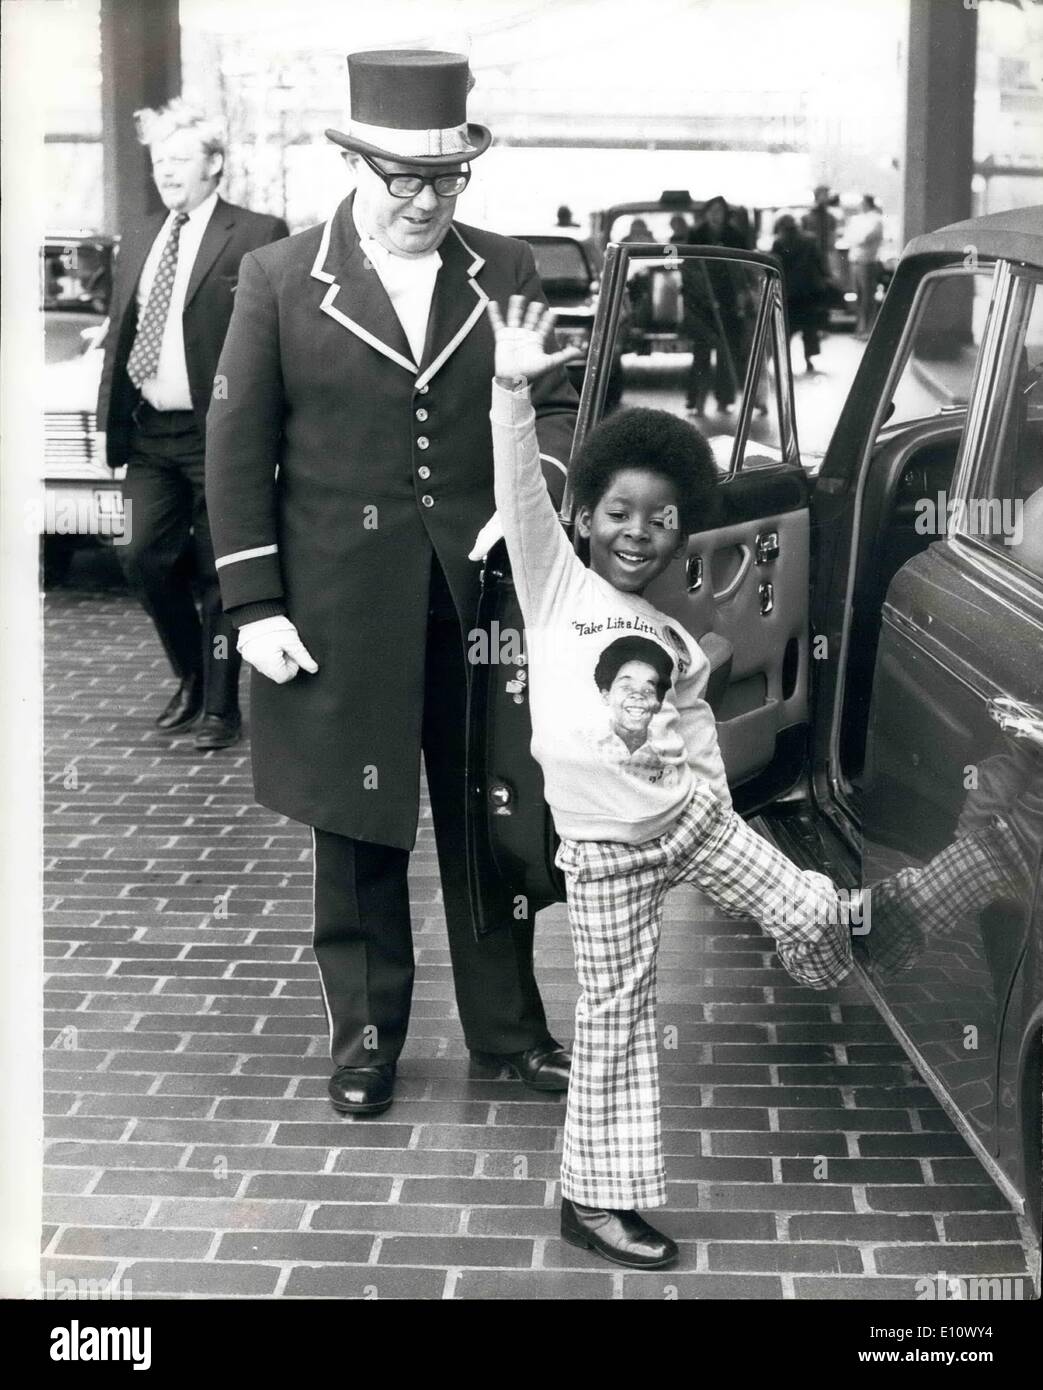 May 05, 1974 - Five Year Old Superstar in London. Pop star and actor Rodney Allen Rippy, who is superstar at the age of 5, arrived in London today from America. Rodney, son of an American ethnic dustman, first shot to fame when he was three when he appeared in a TV hamburger commercial, and is expected to be a dollar millionaire before he is six. He is over here to appear on Yorkshire Television's Junior Showtime. Keystone Photo Shows: Rodney Allen Rippy gets the VIP treatment from the doorman, who opens the door of a Rolls Royce for him, as he left the hotel after his Press Conference today. Stock Photo